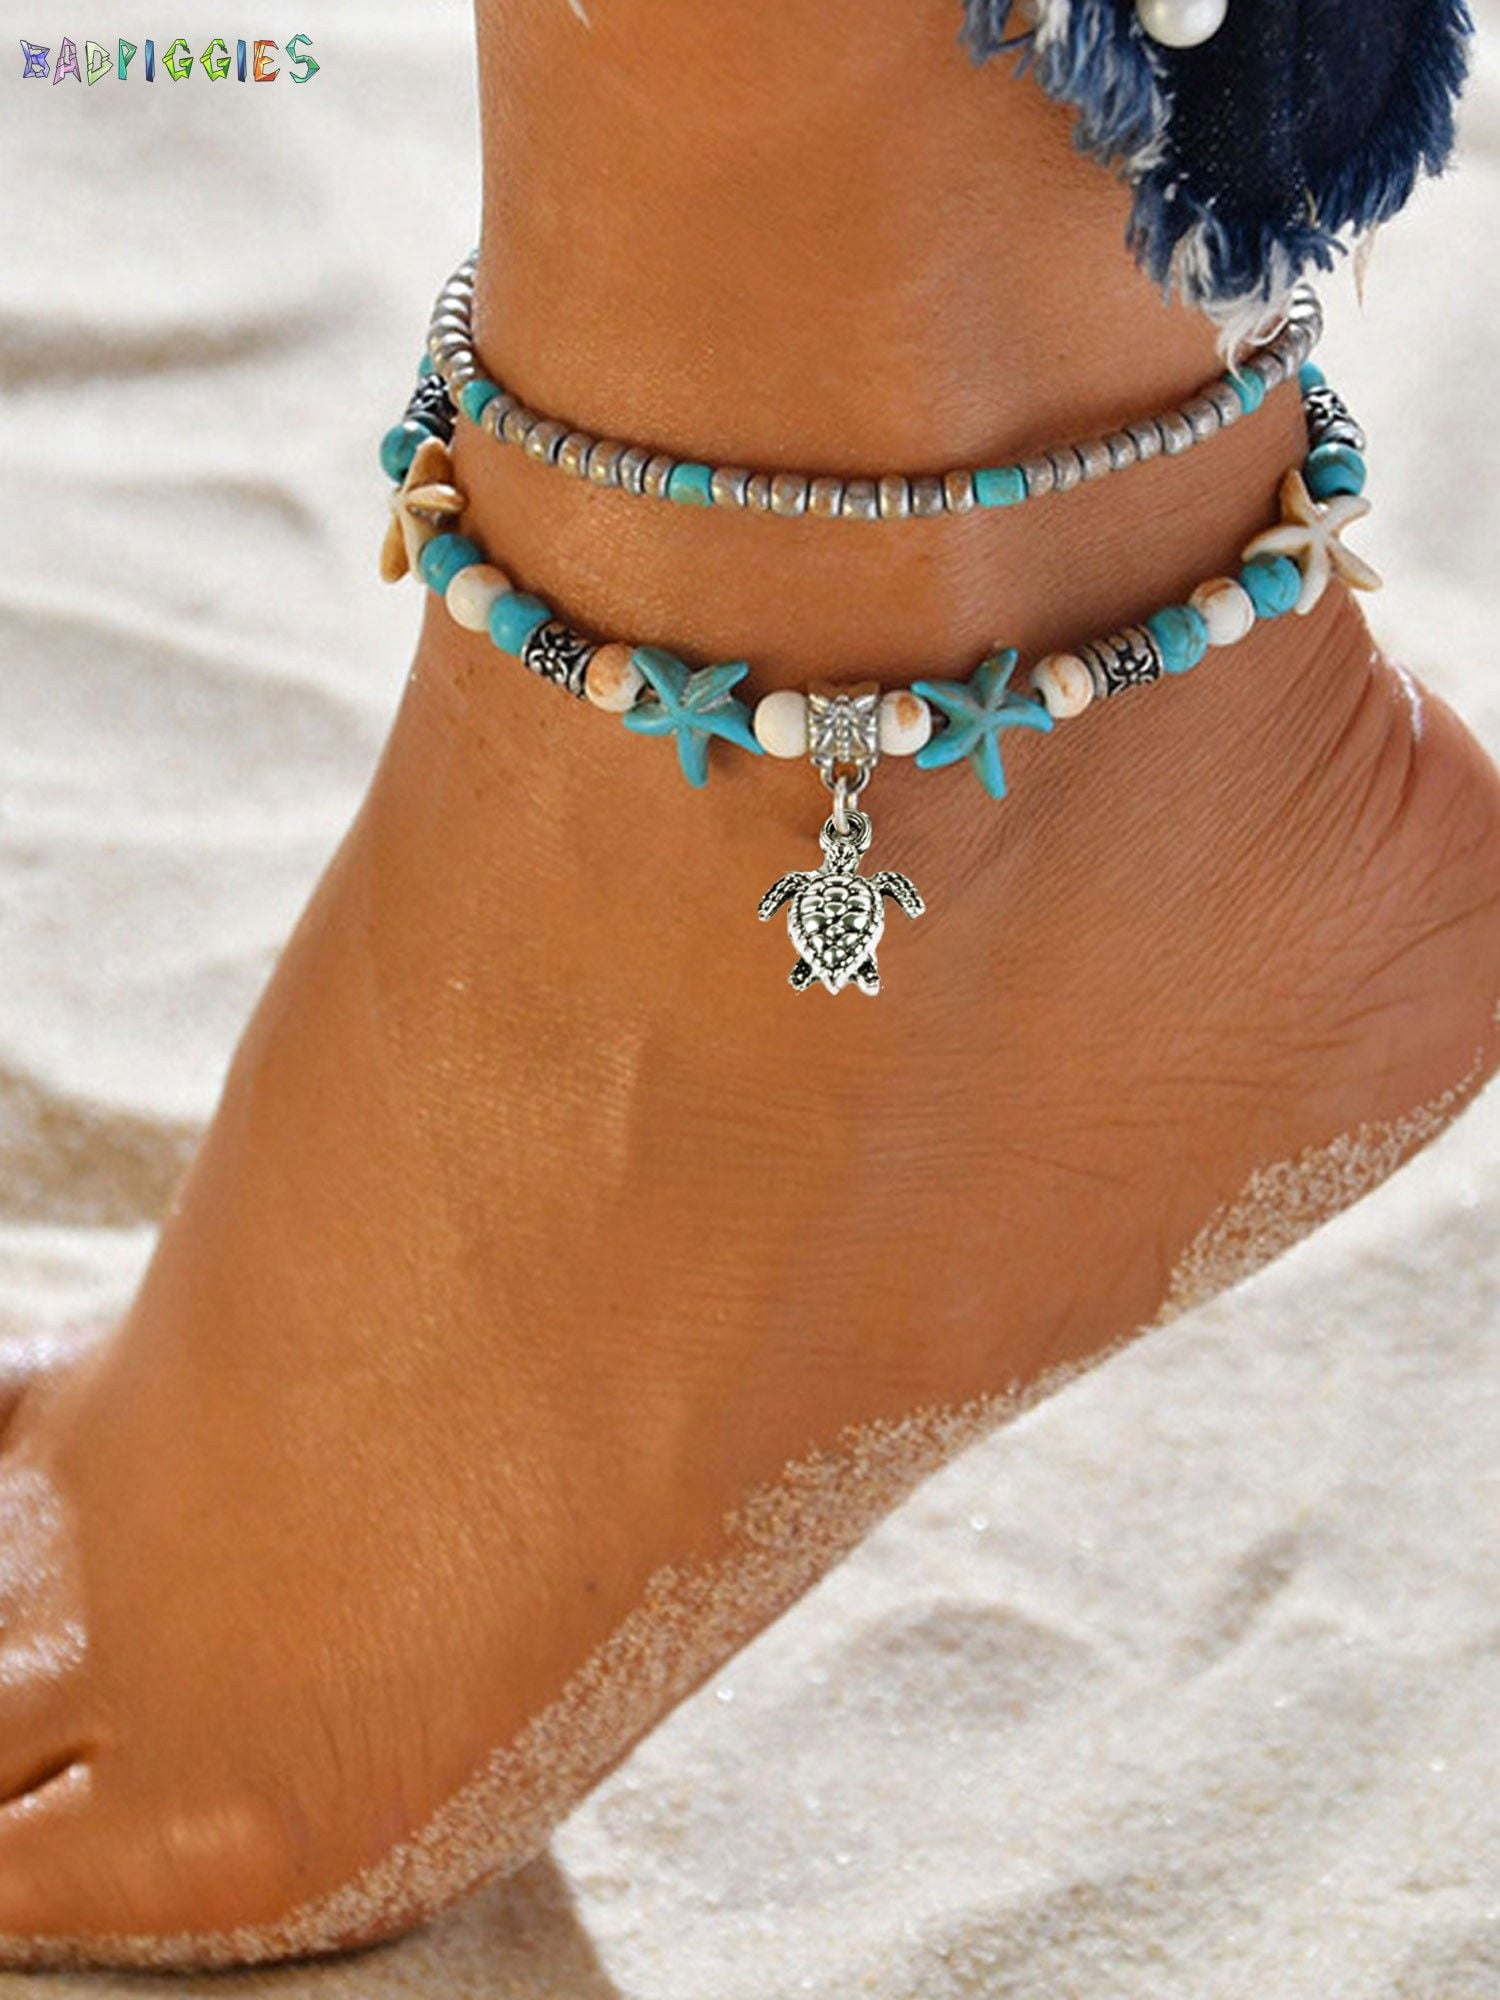 Silver Sun Ankle Bracelet Multi Layer Womens Anklet Adjustable Chain Beach Beads 